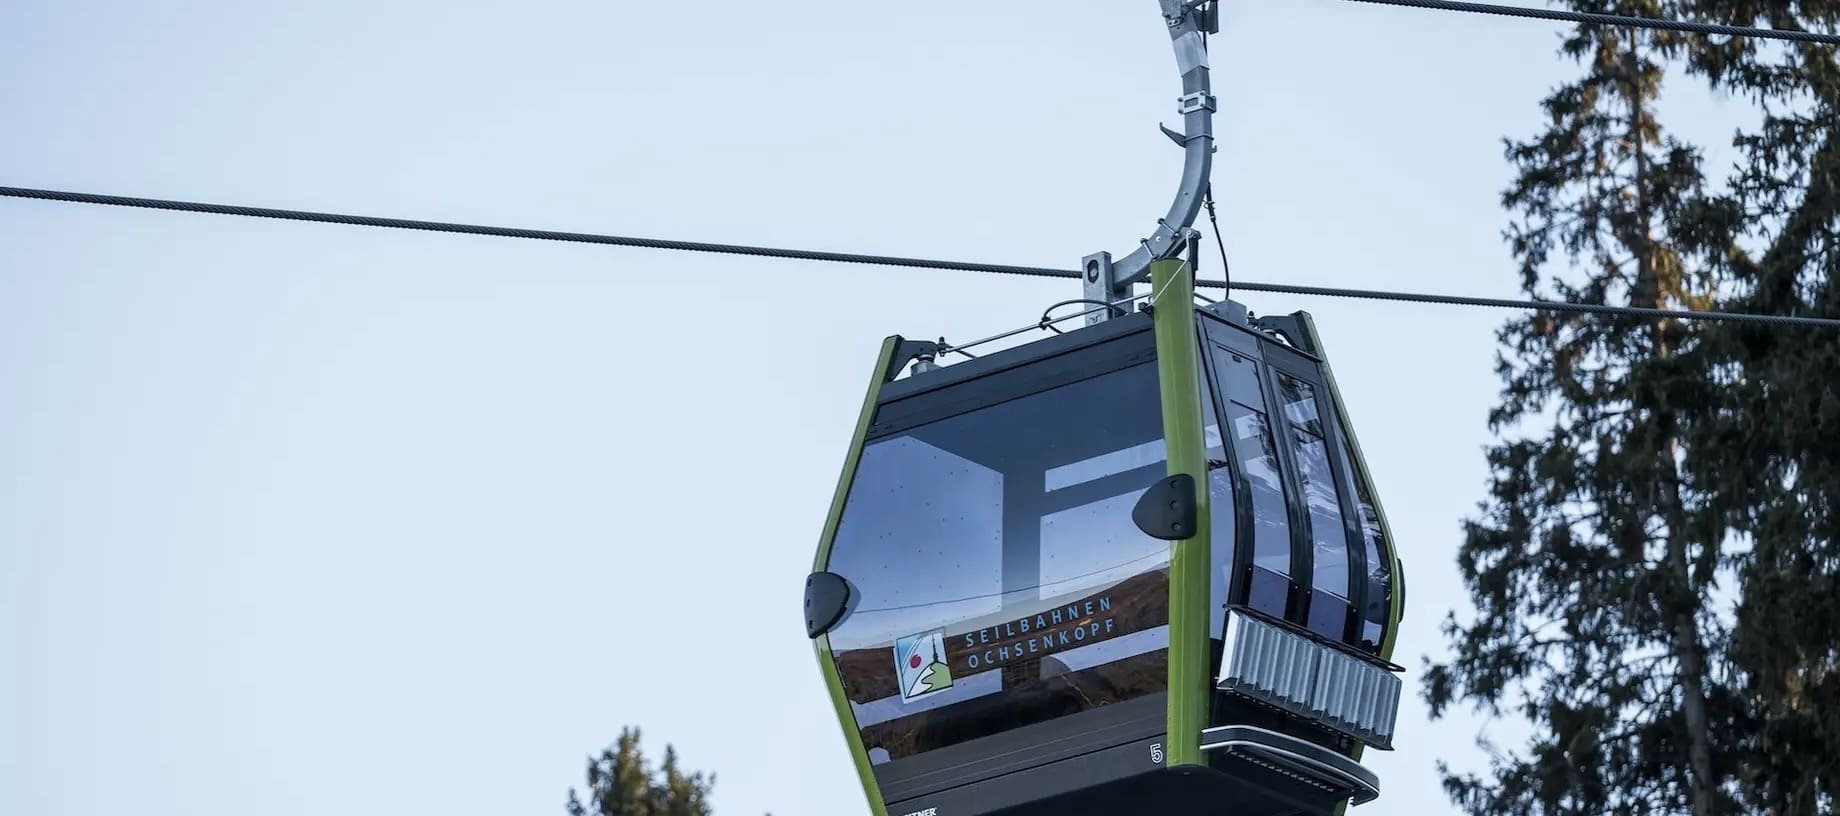 Say What Now? Woman Found After Being Stuck on Ski Gondola for 15 Hours